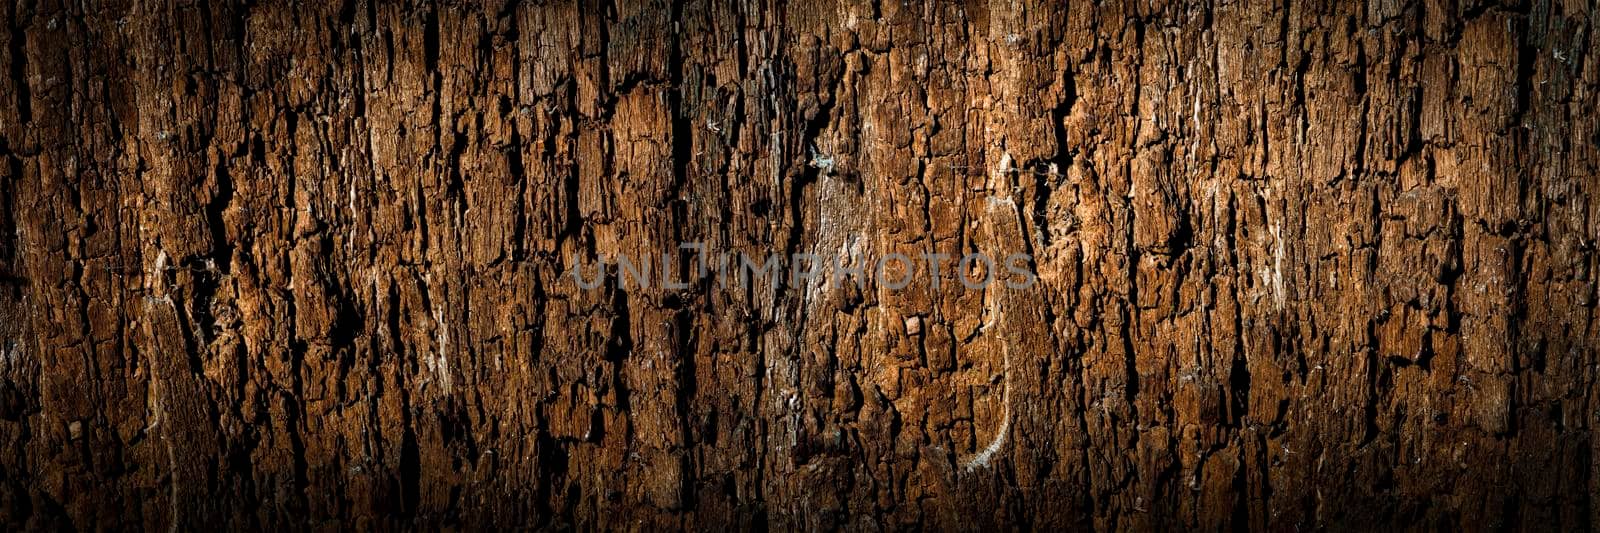 Texture of old wood with cracks. Old, cracked wood background, high resolution